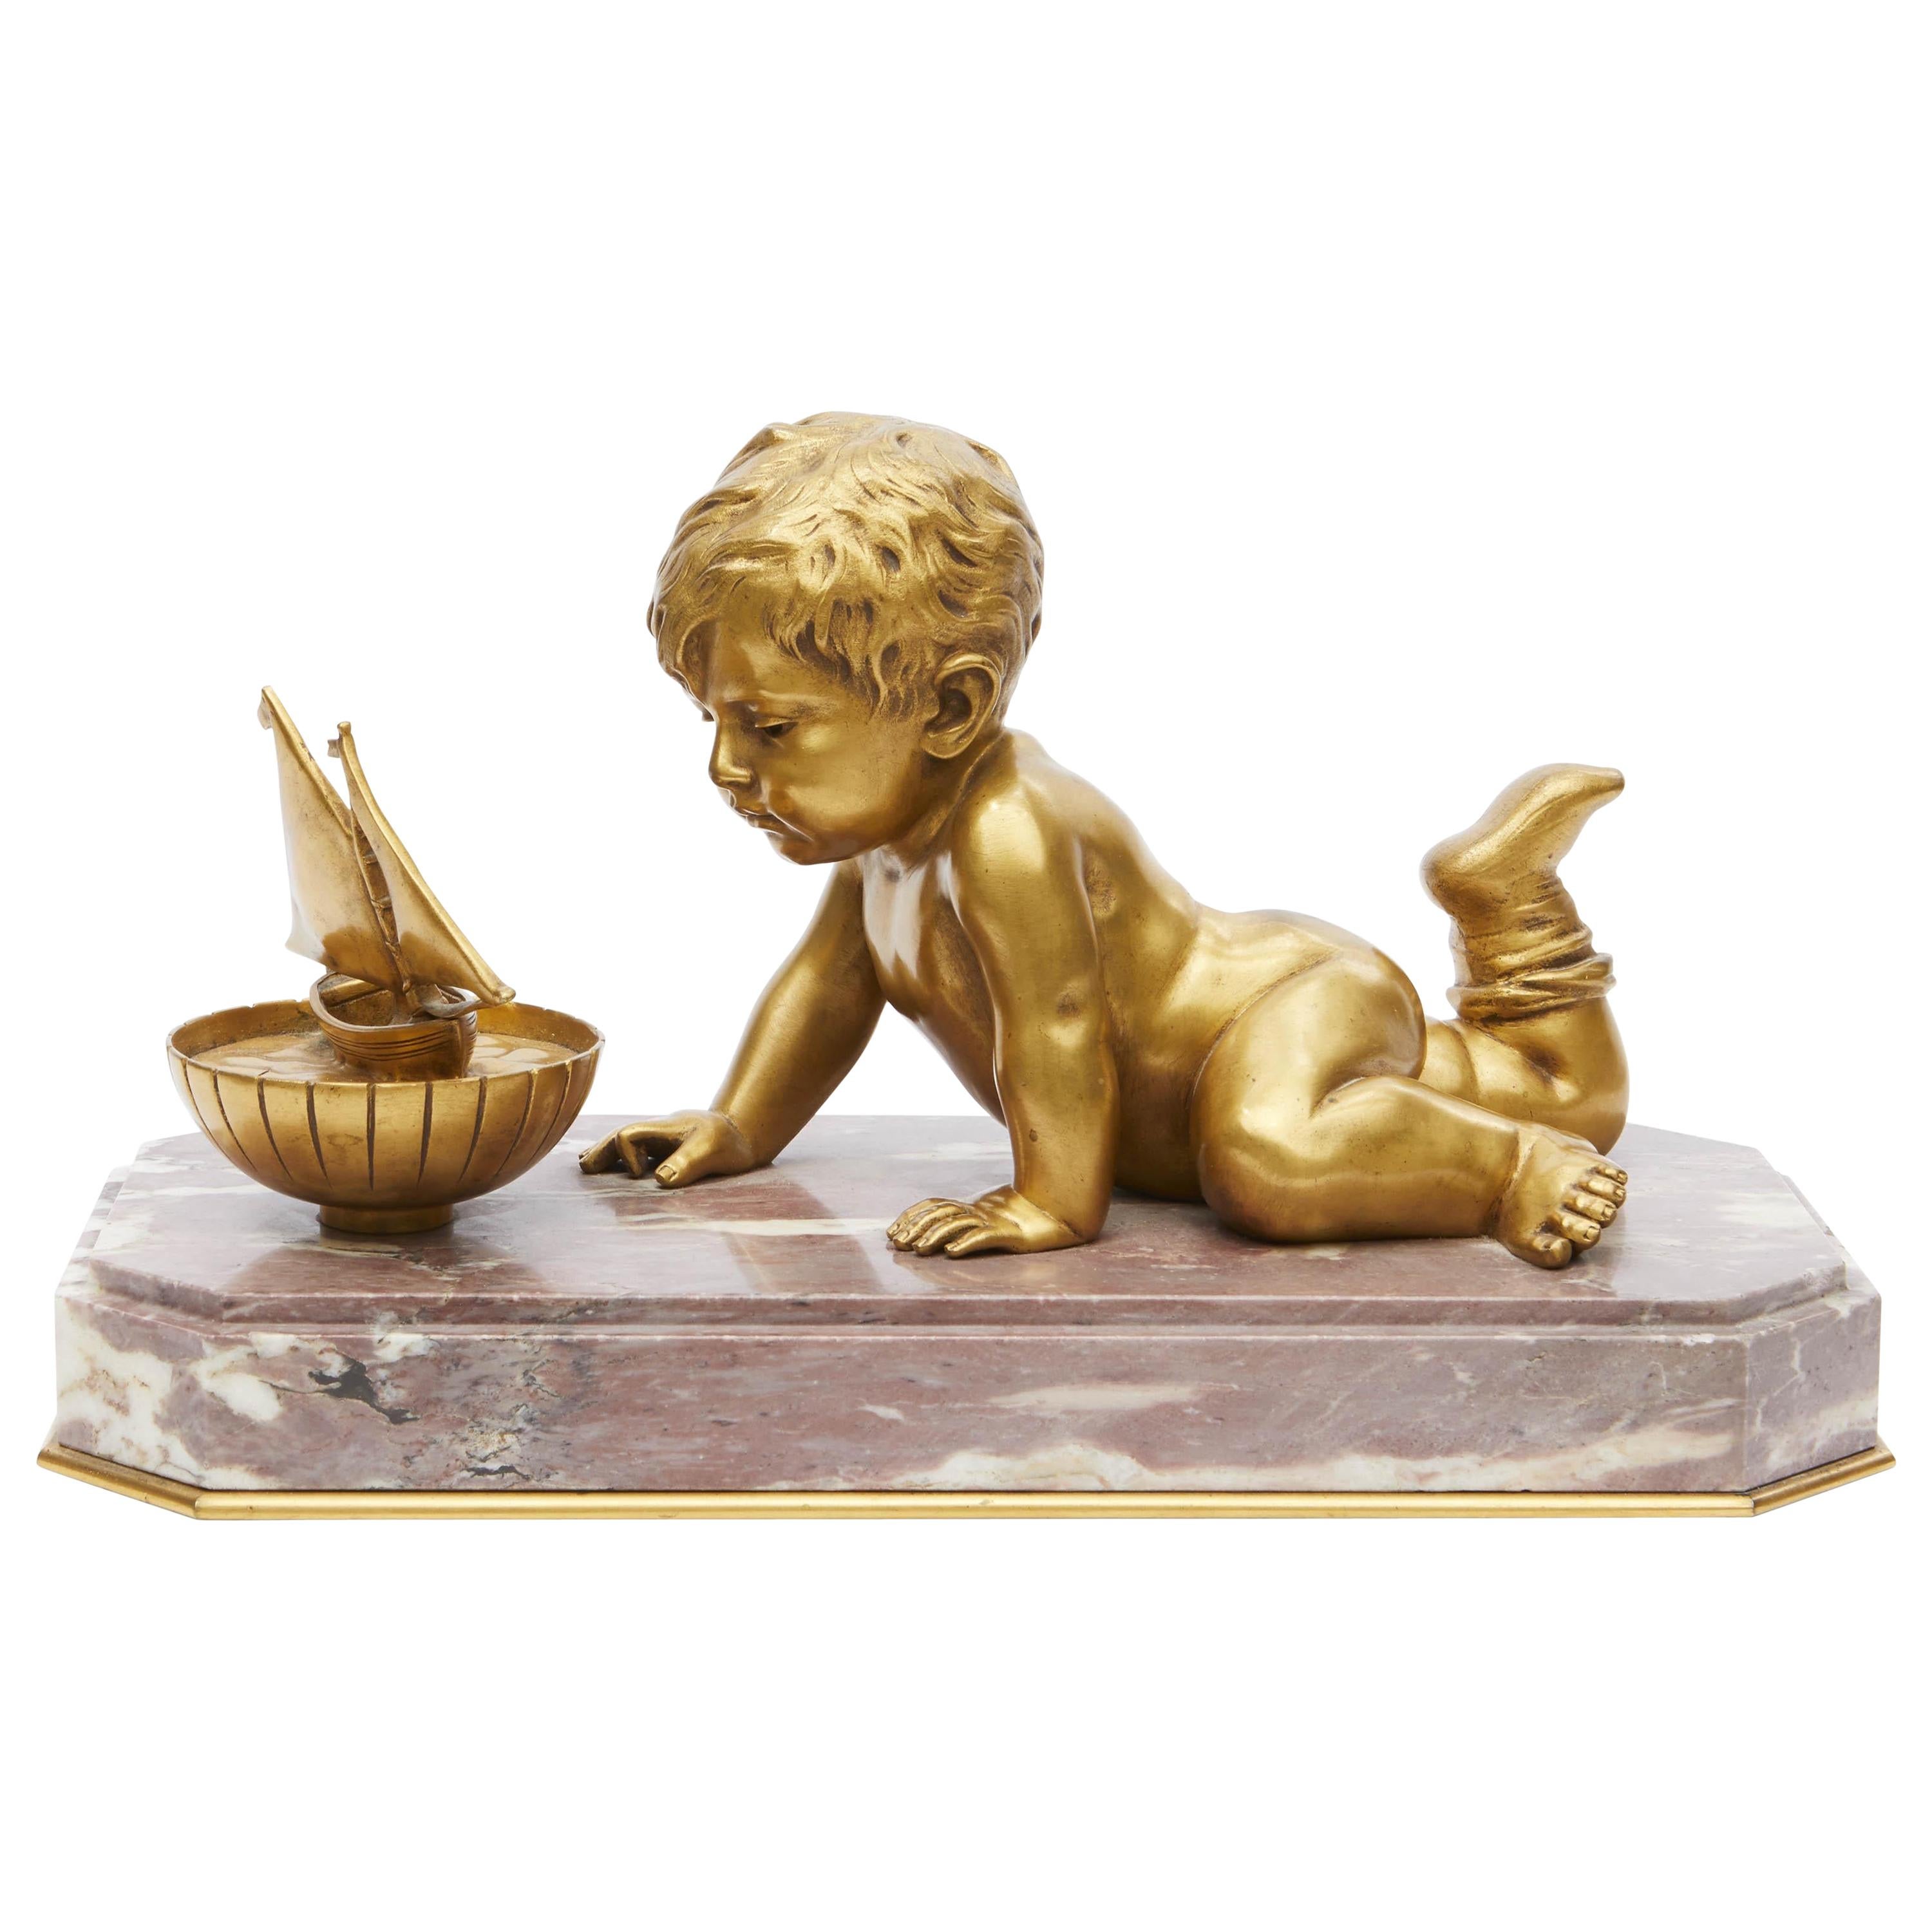 19th Century Large Gilt Bronze Cherub Playing with His Toy Boat on a Marble Base